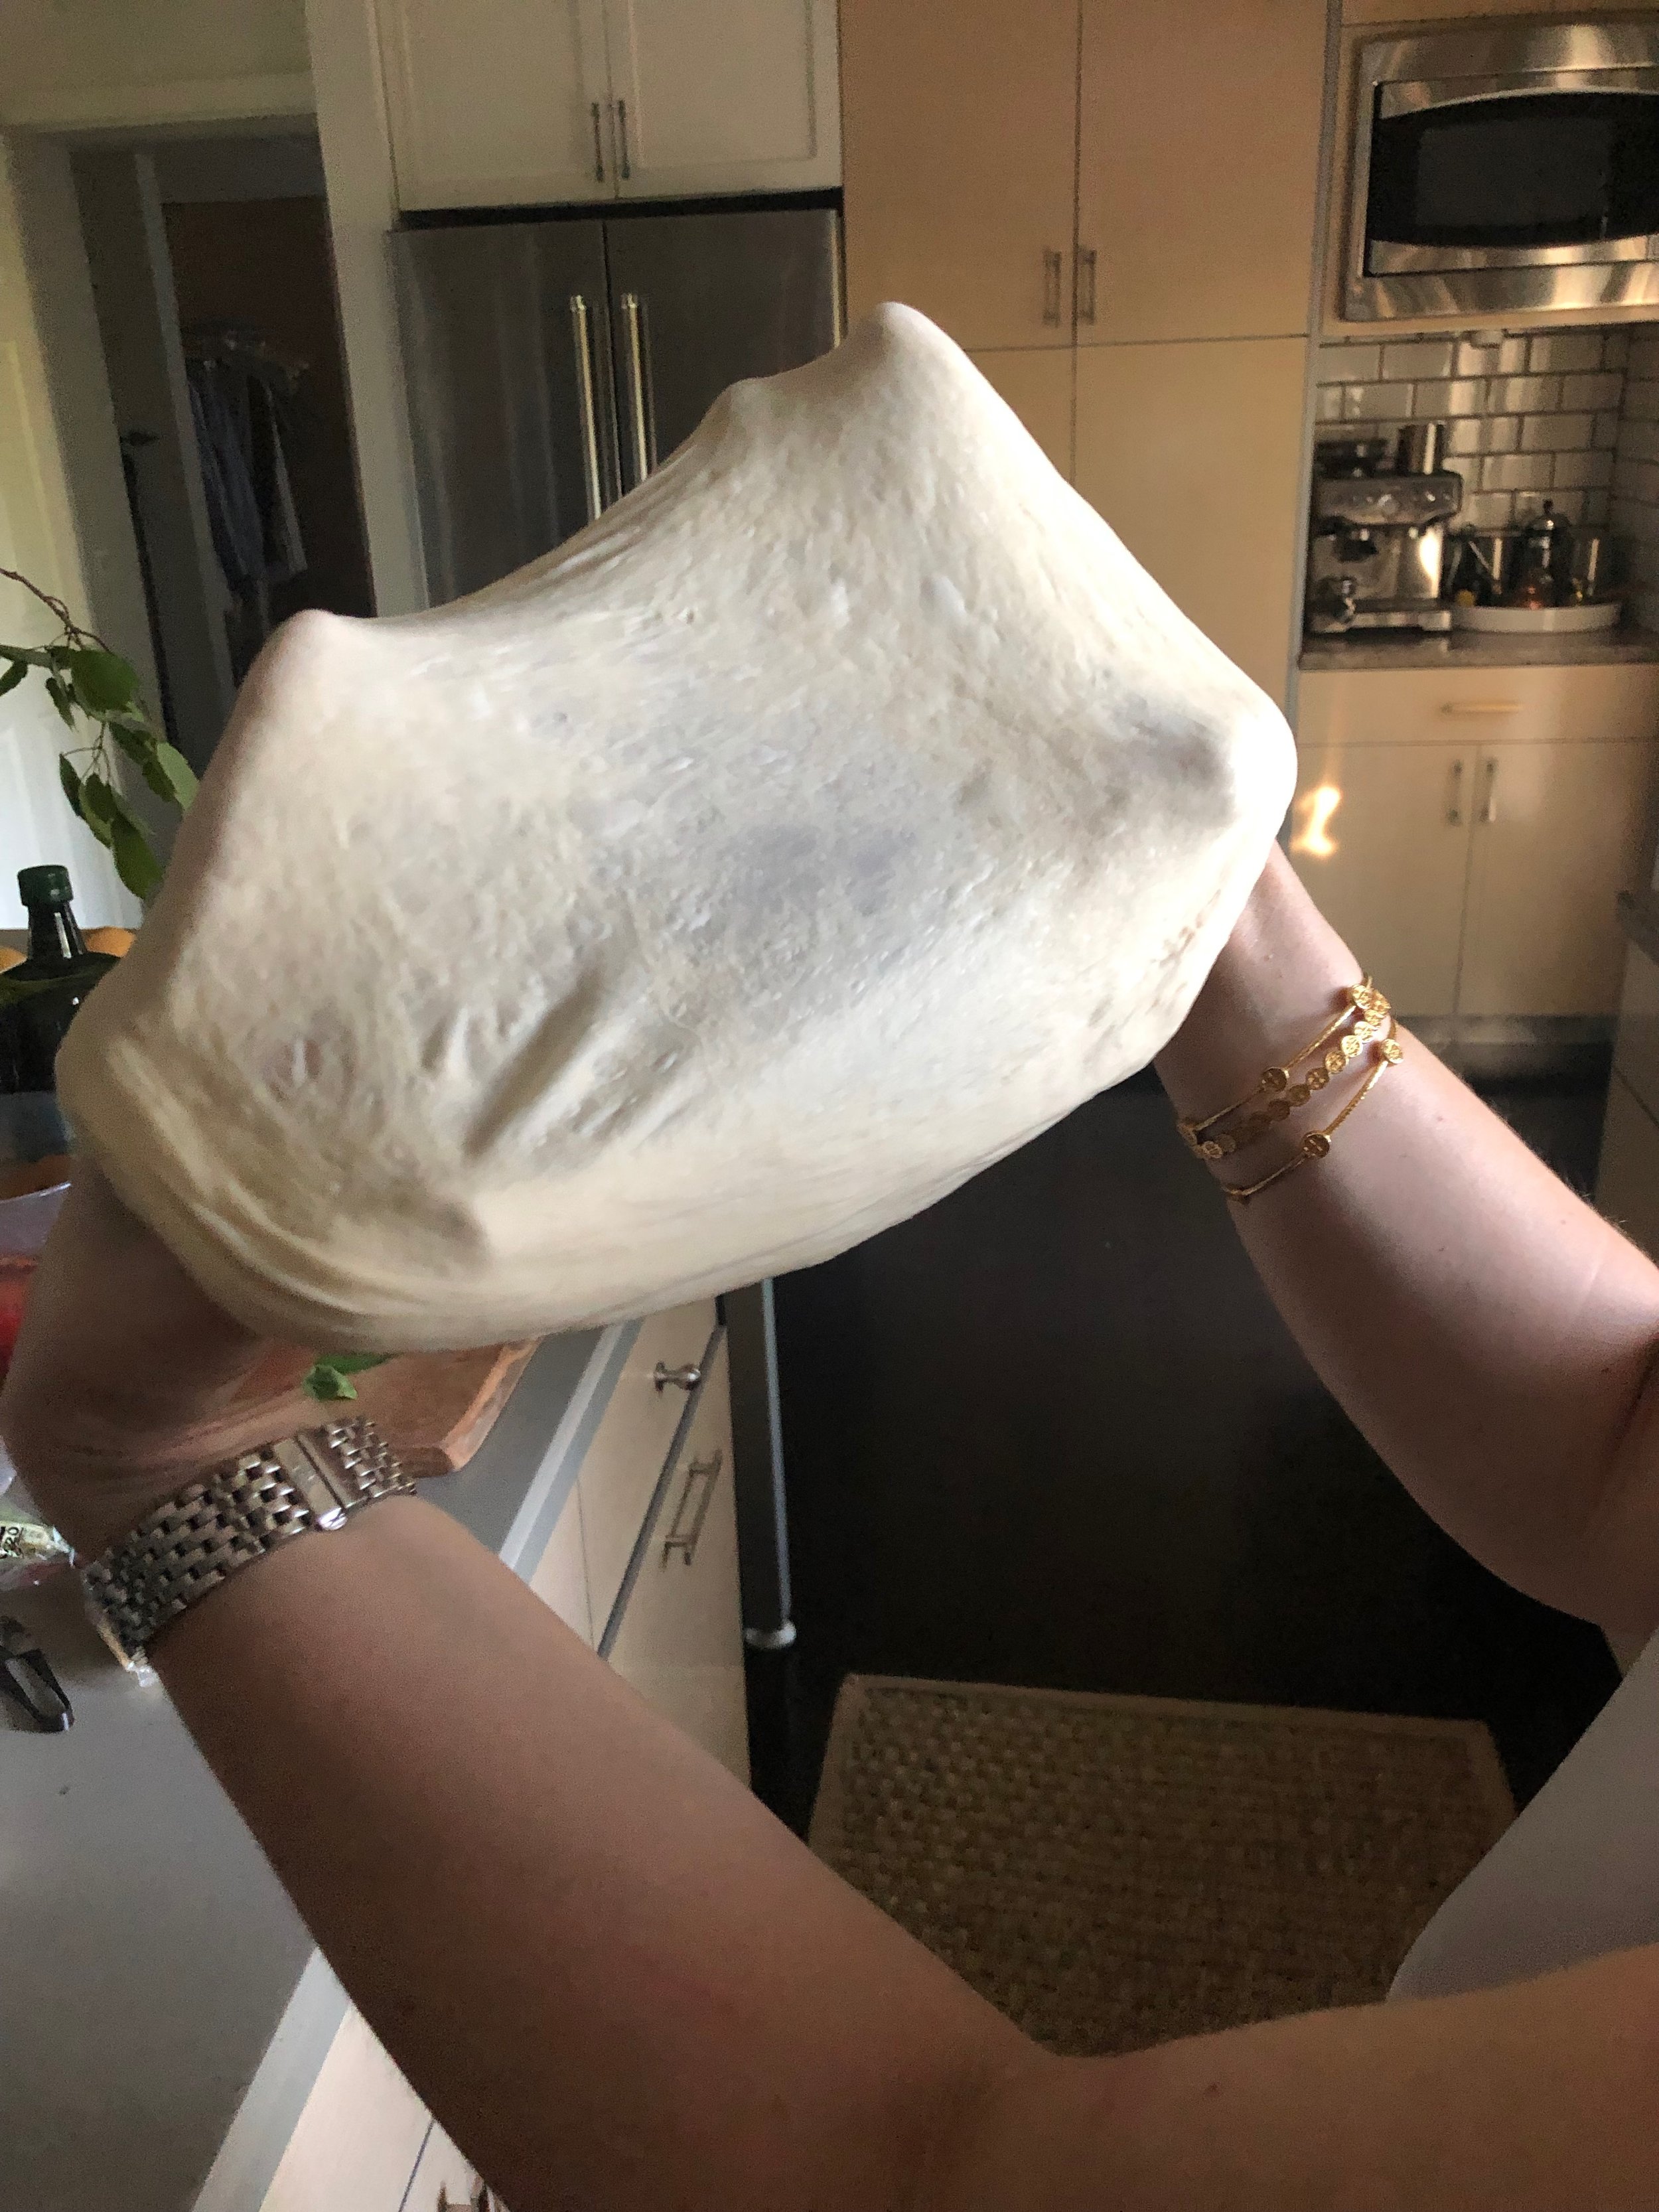 Stretching the pizza dough until transparent in the middle